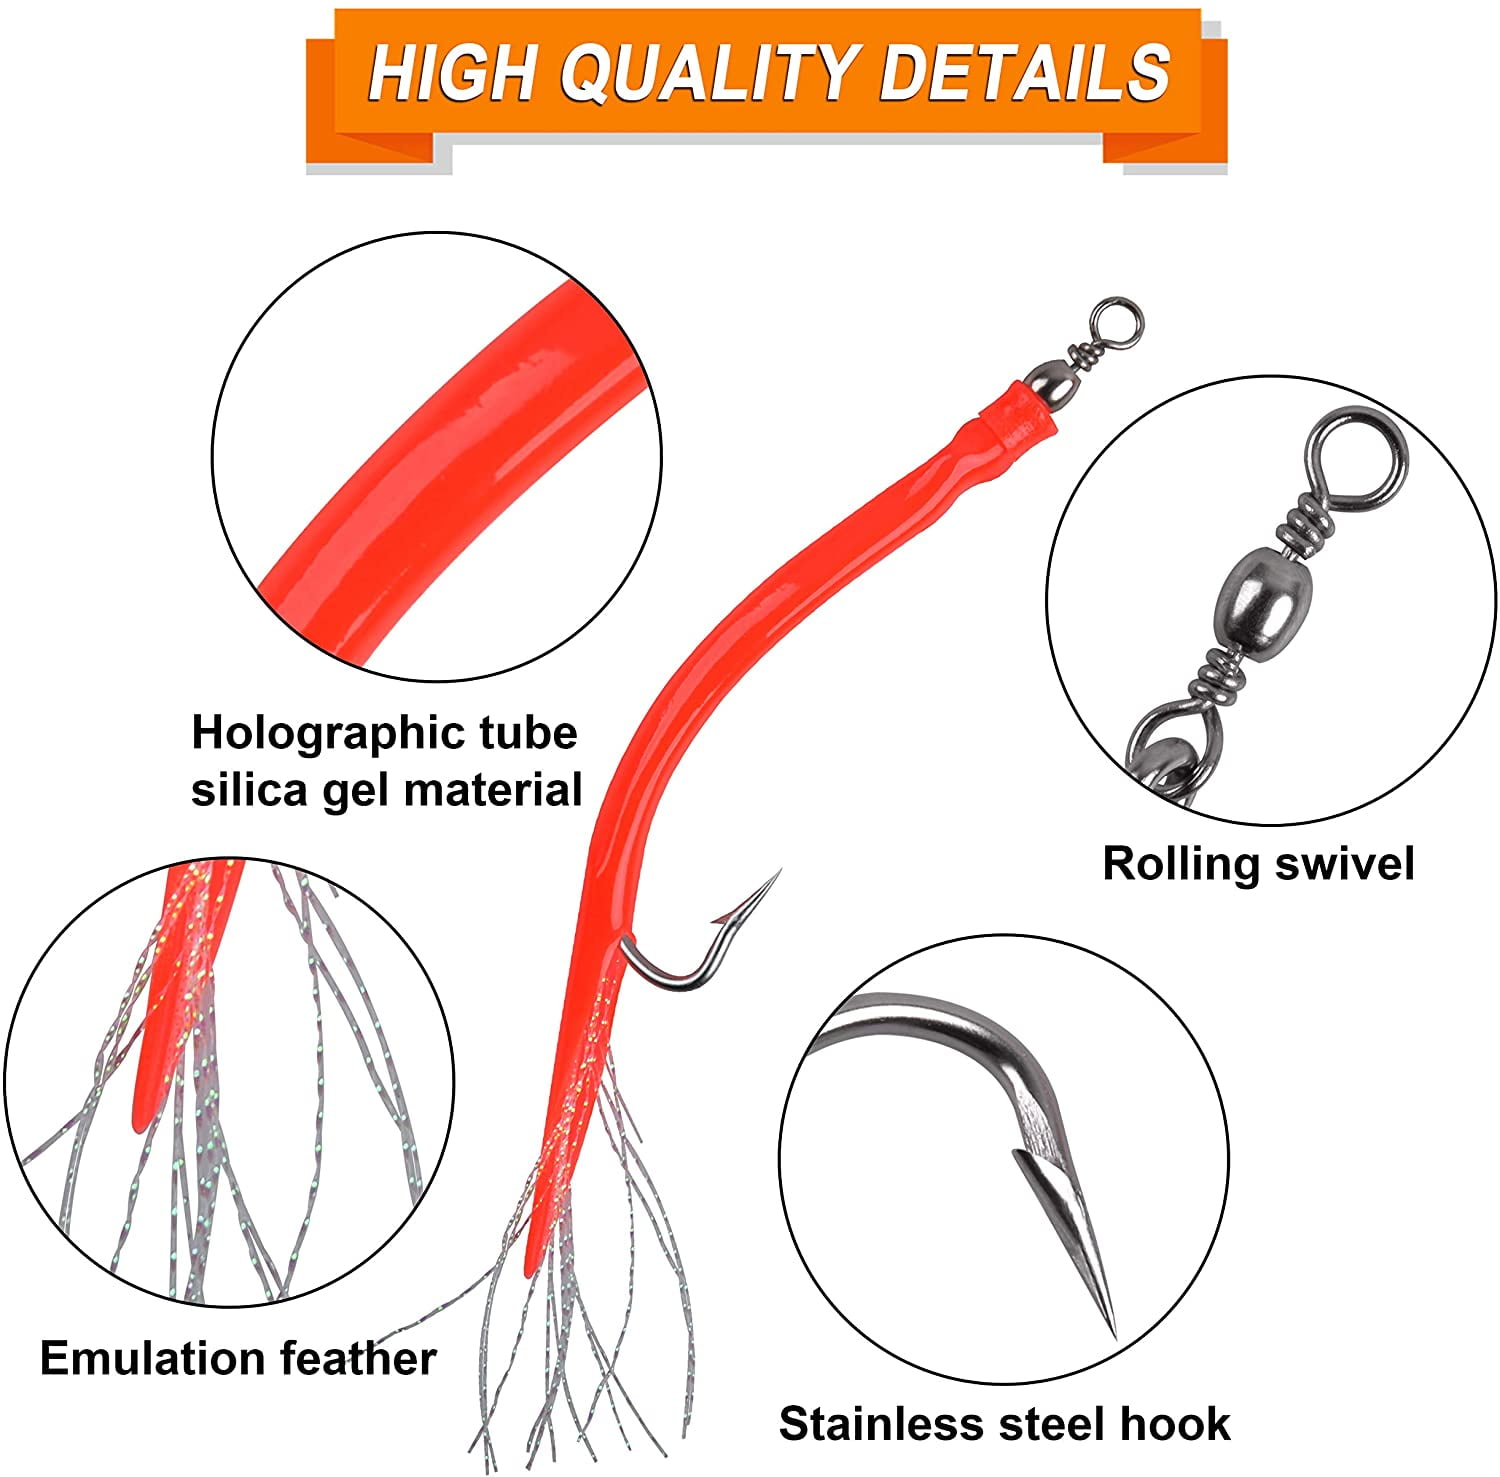 Fishing Gear Lures Fishing Lure Trolling Fishing Eel Jig Bait Long Shank  Offset Hook Rig Striped Bass Fishing Lure with Rubber Tube Flash Teaser  24Pcs